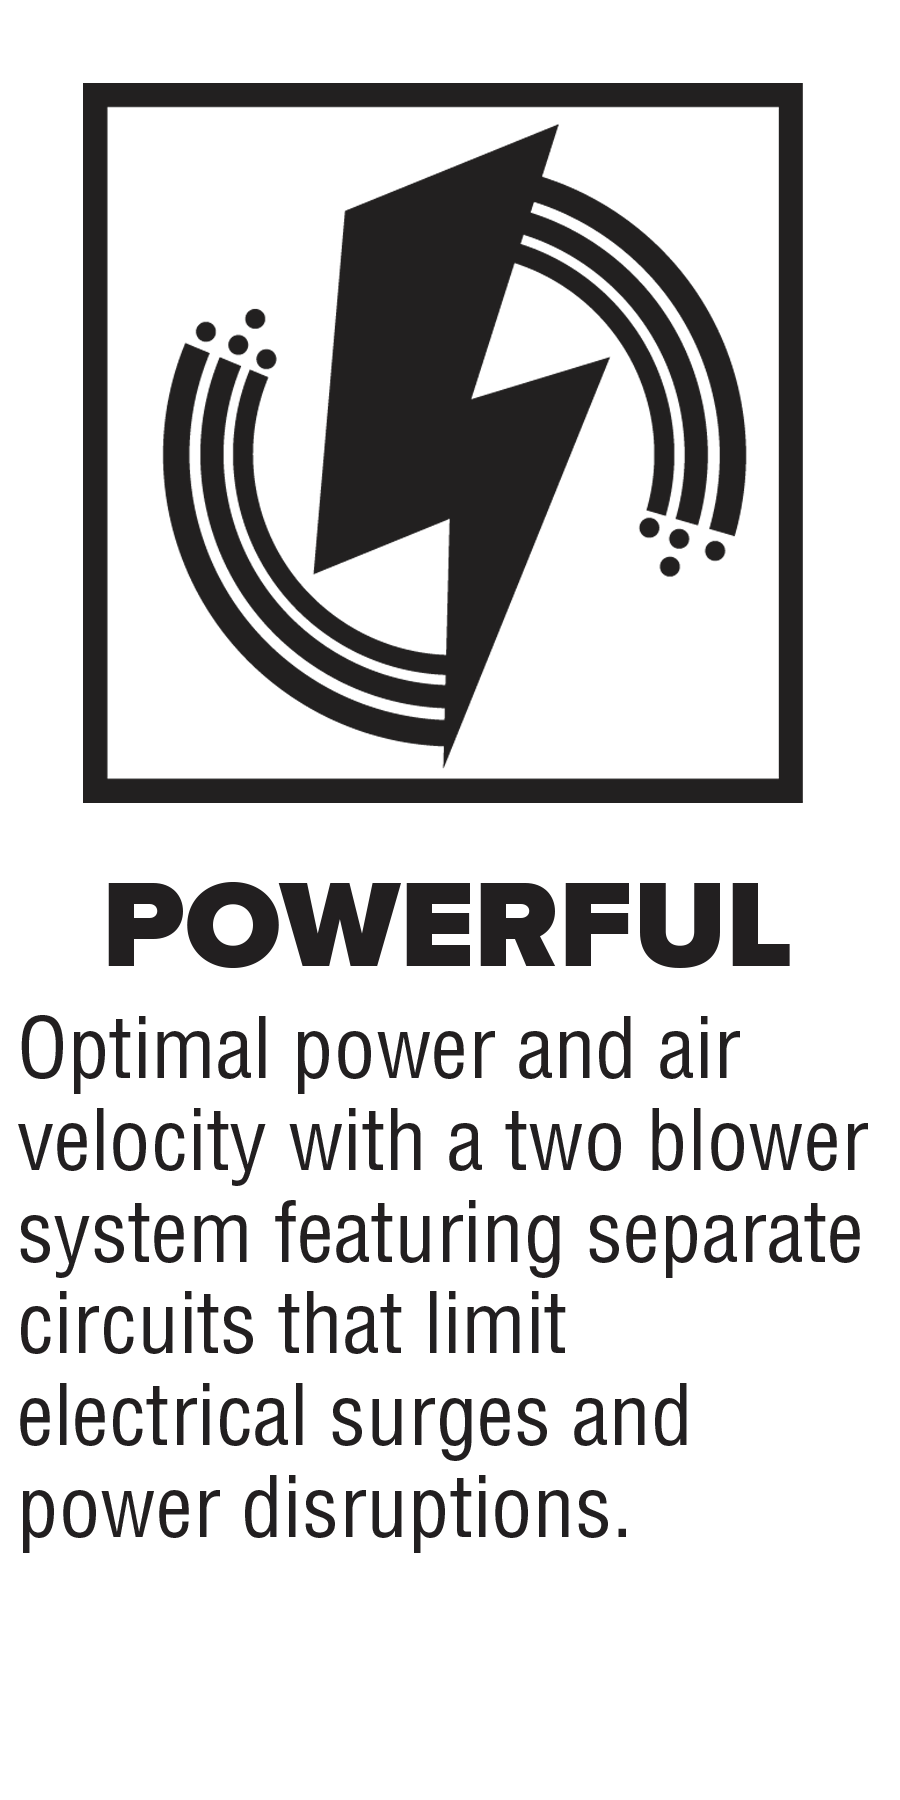 Powerful, Optimal power and air velocity with a two blower system featuring separate circuits that limit electrical surges and power disruptions.